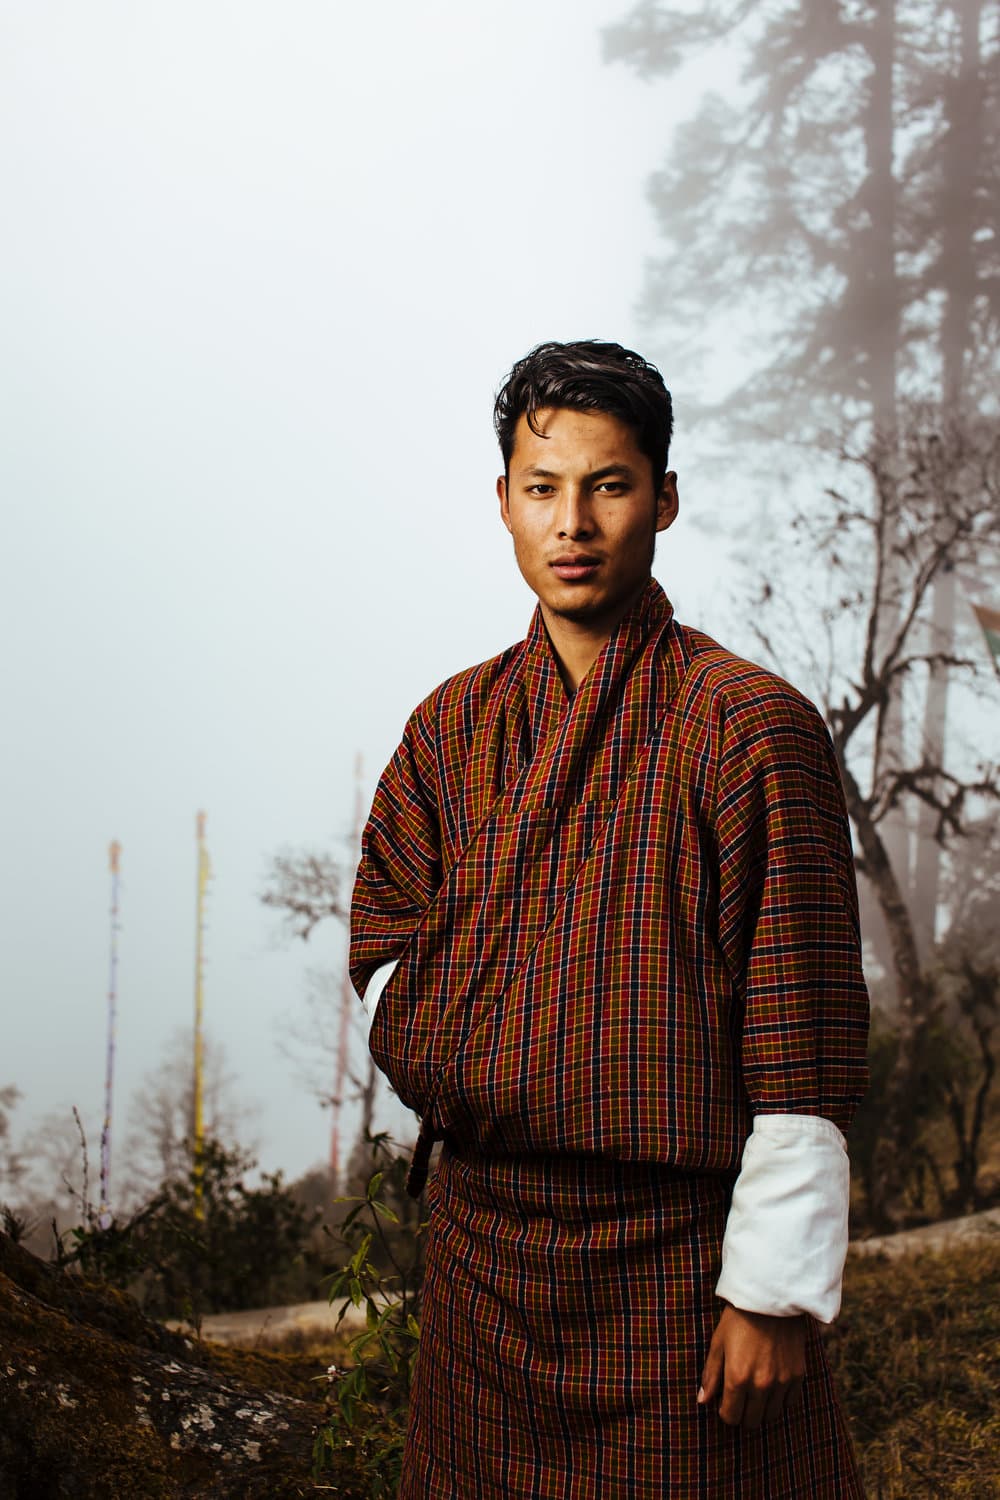 30 Amazing Men's Traditional Outfits from Around the World's traditional outfits